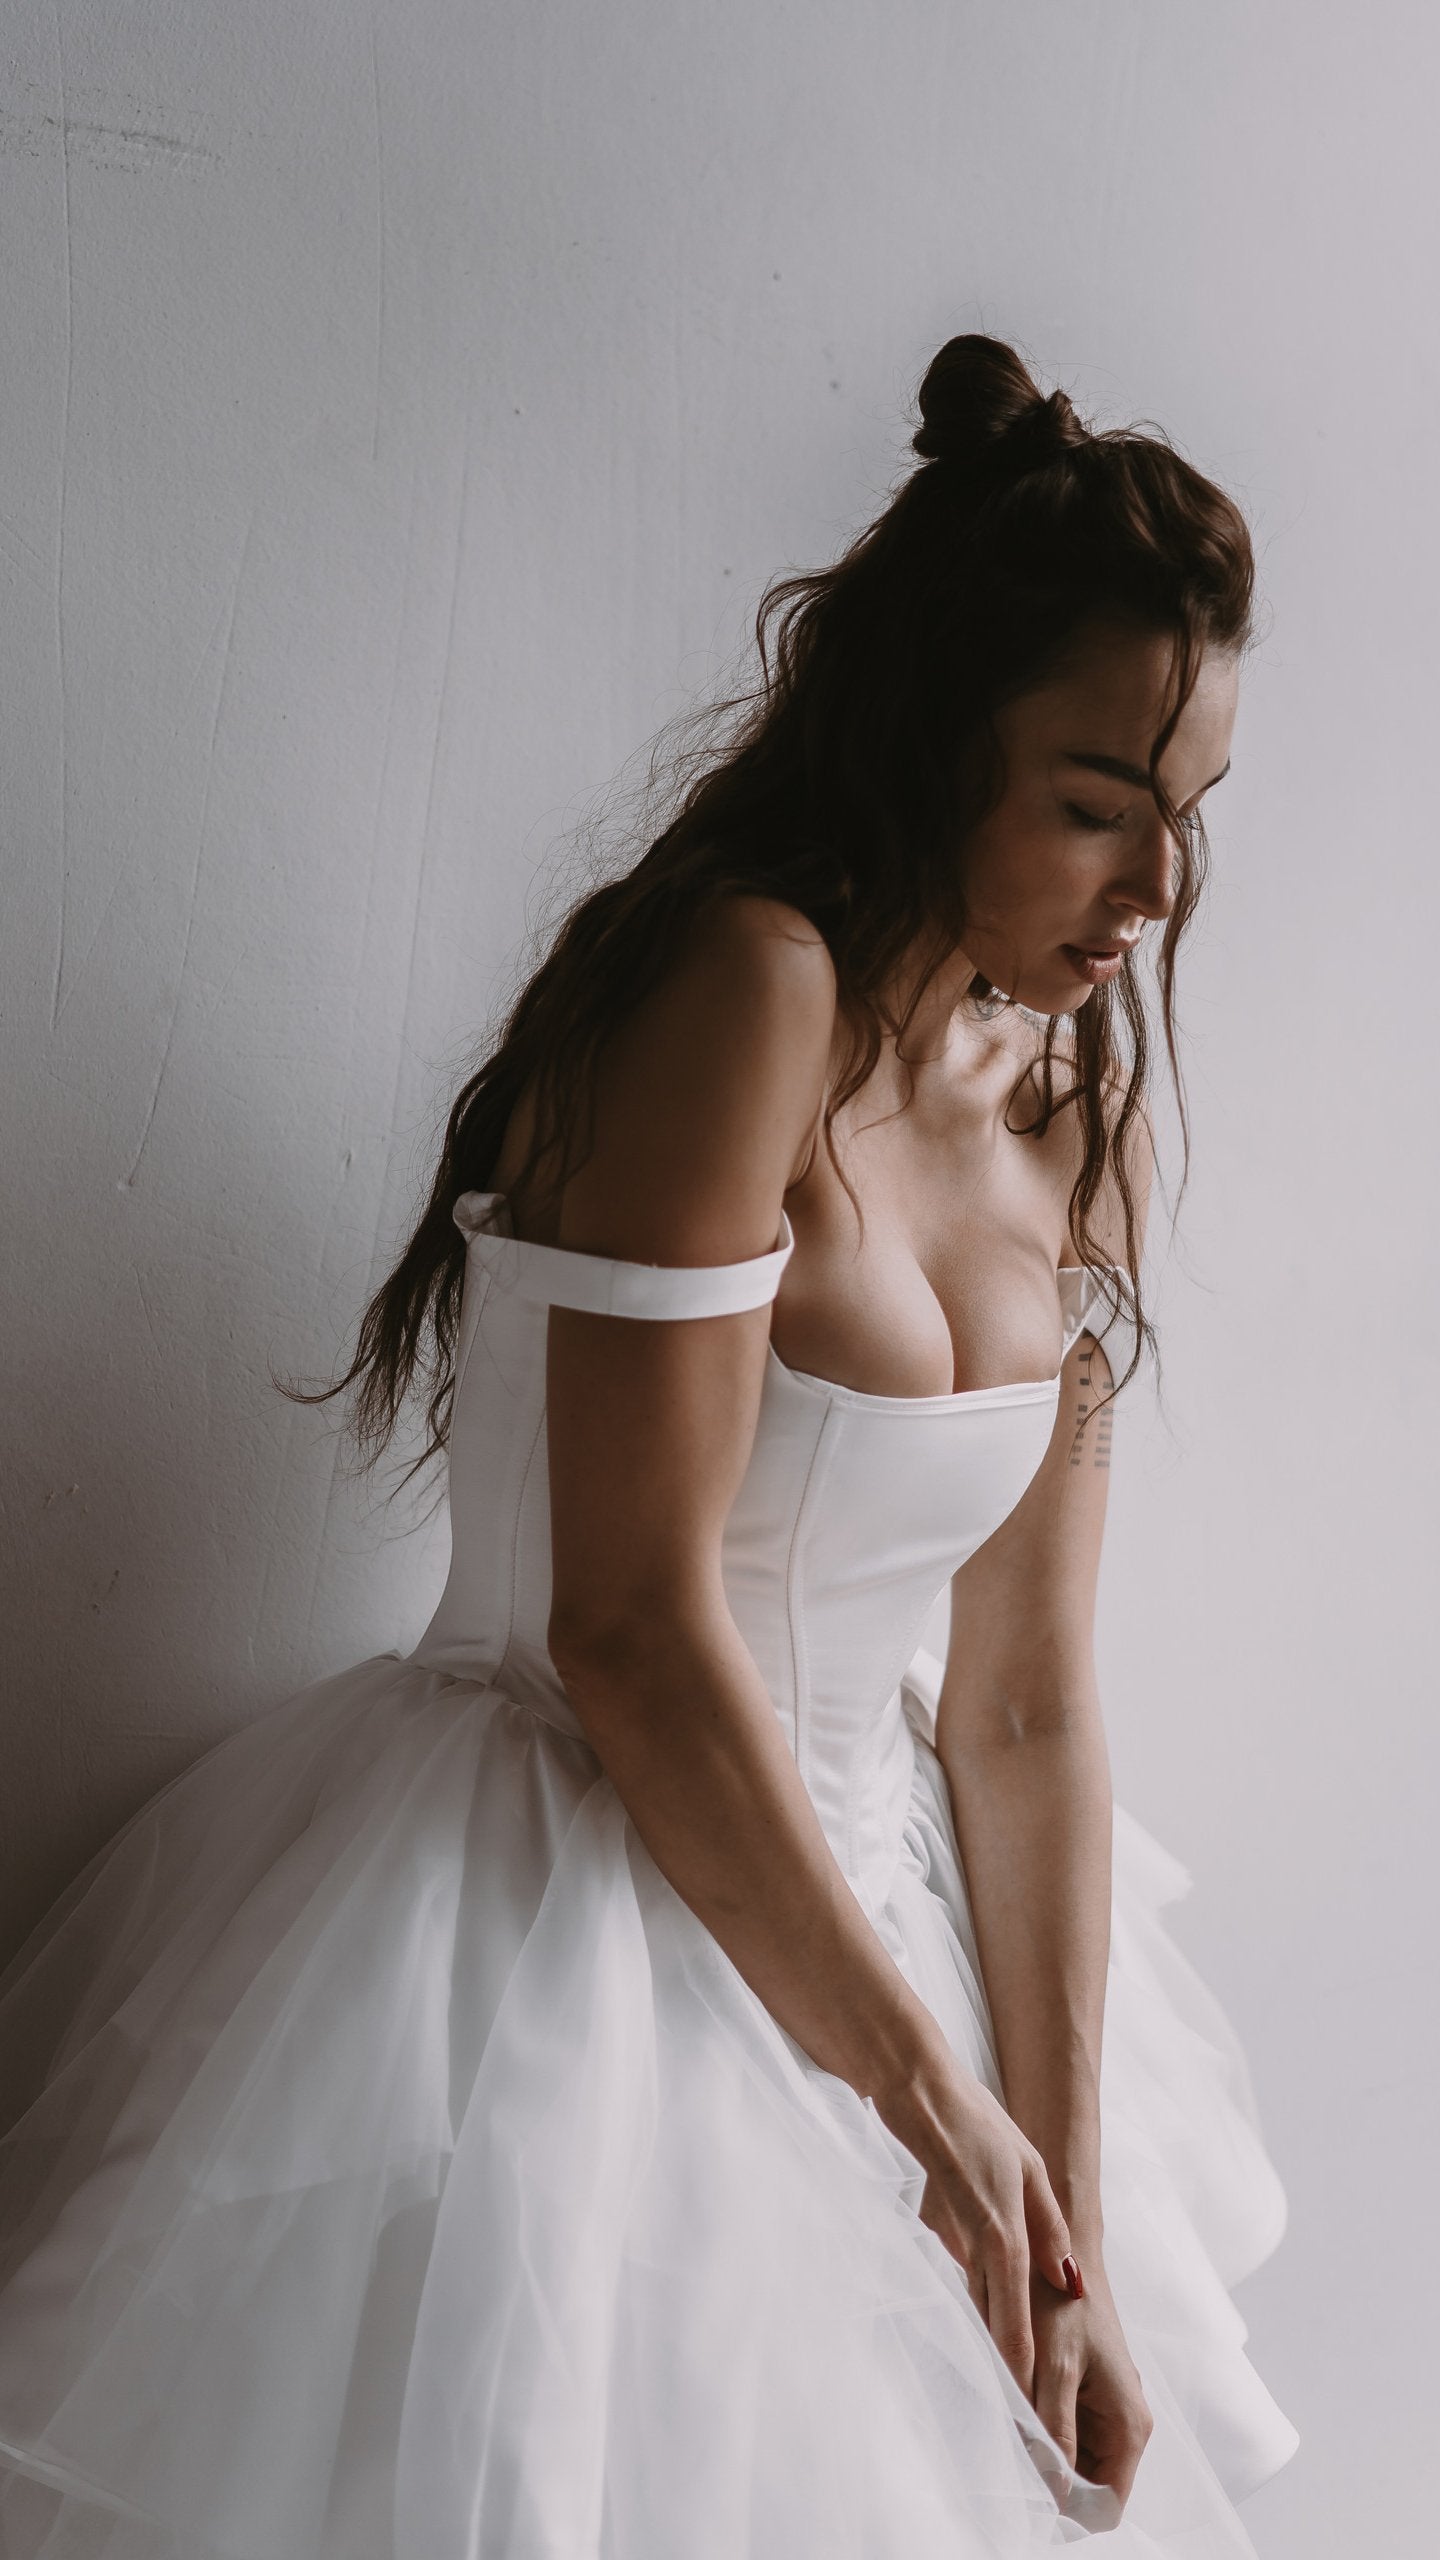 What can I do to conceal bottom of corset line in wedding gown